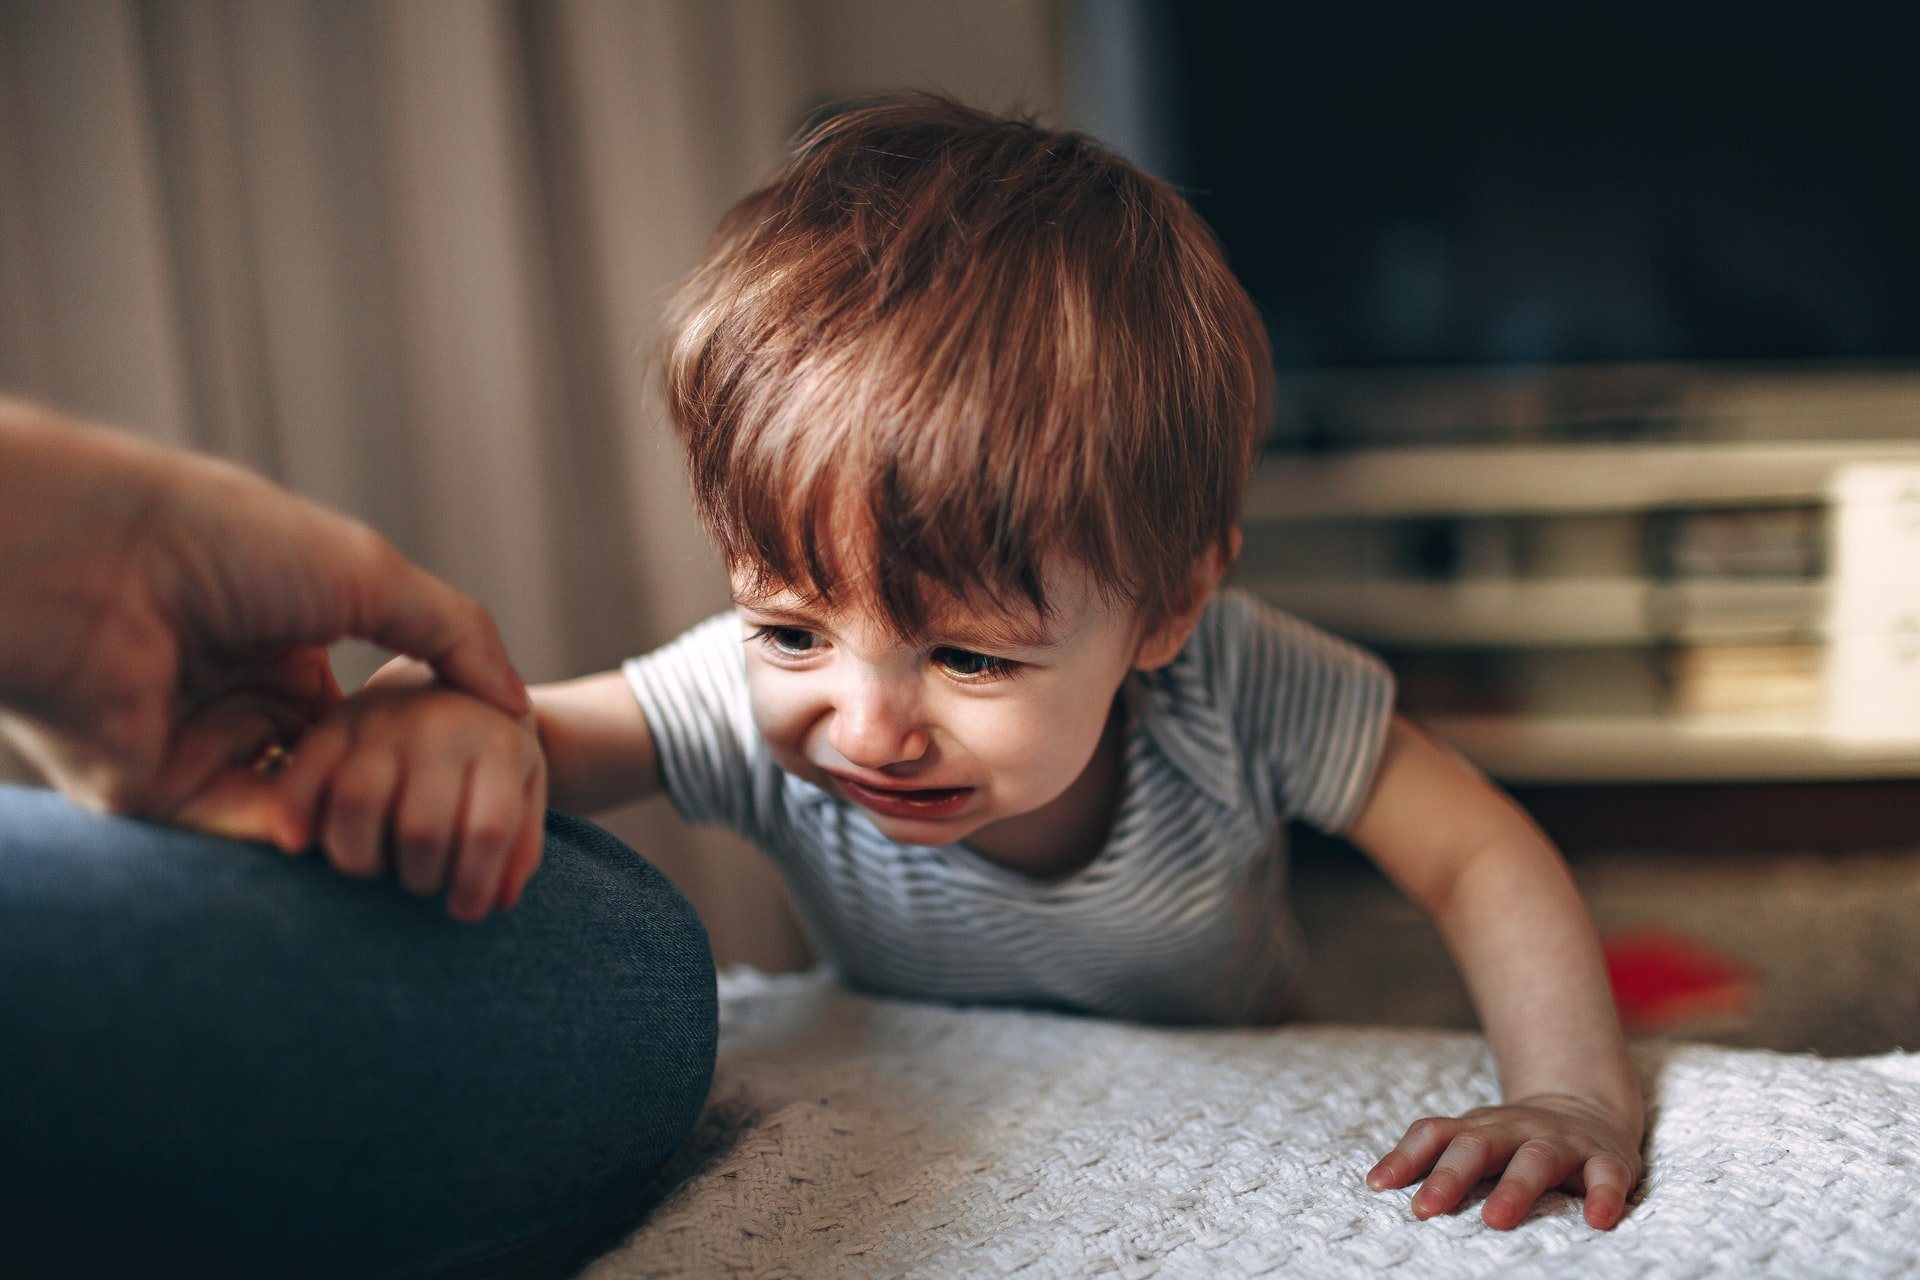 OP's younger siblings were scared | Source: Unsplash